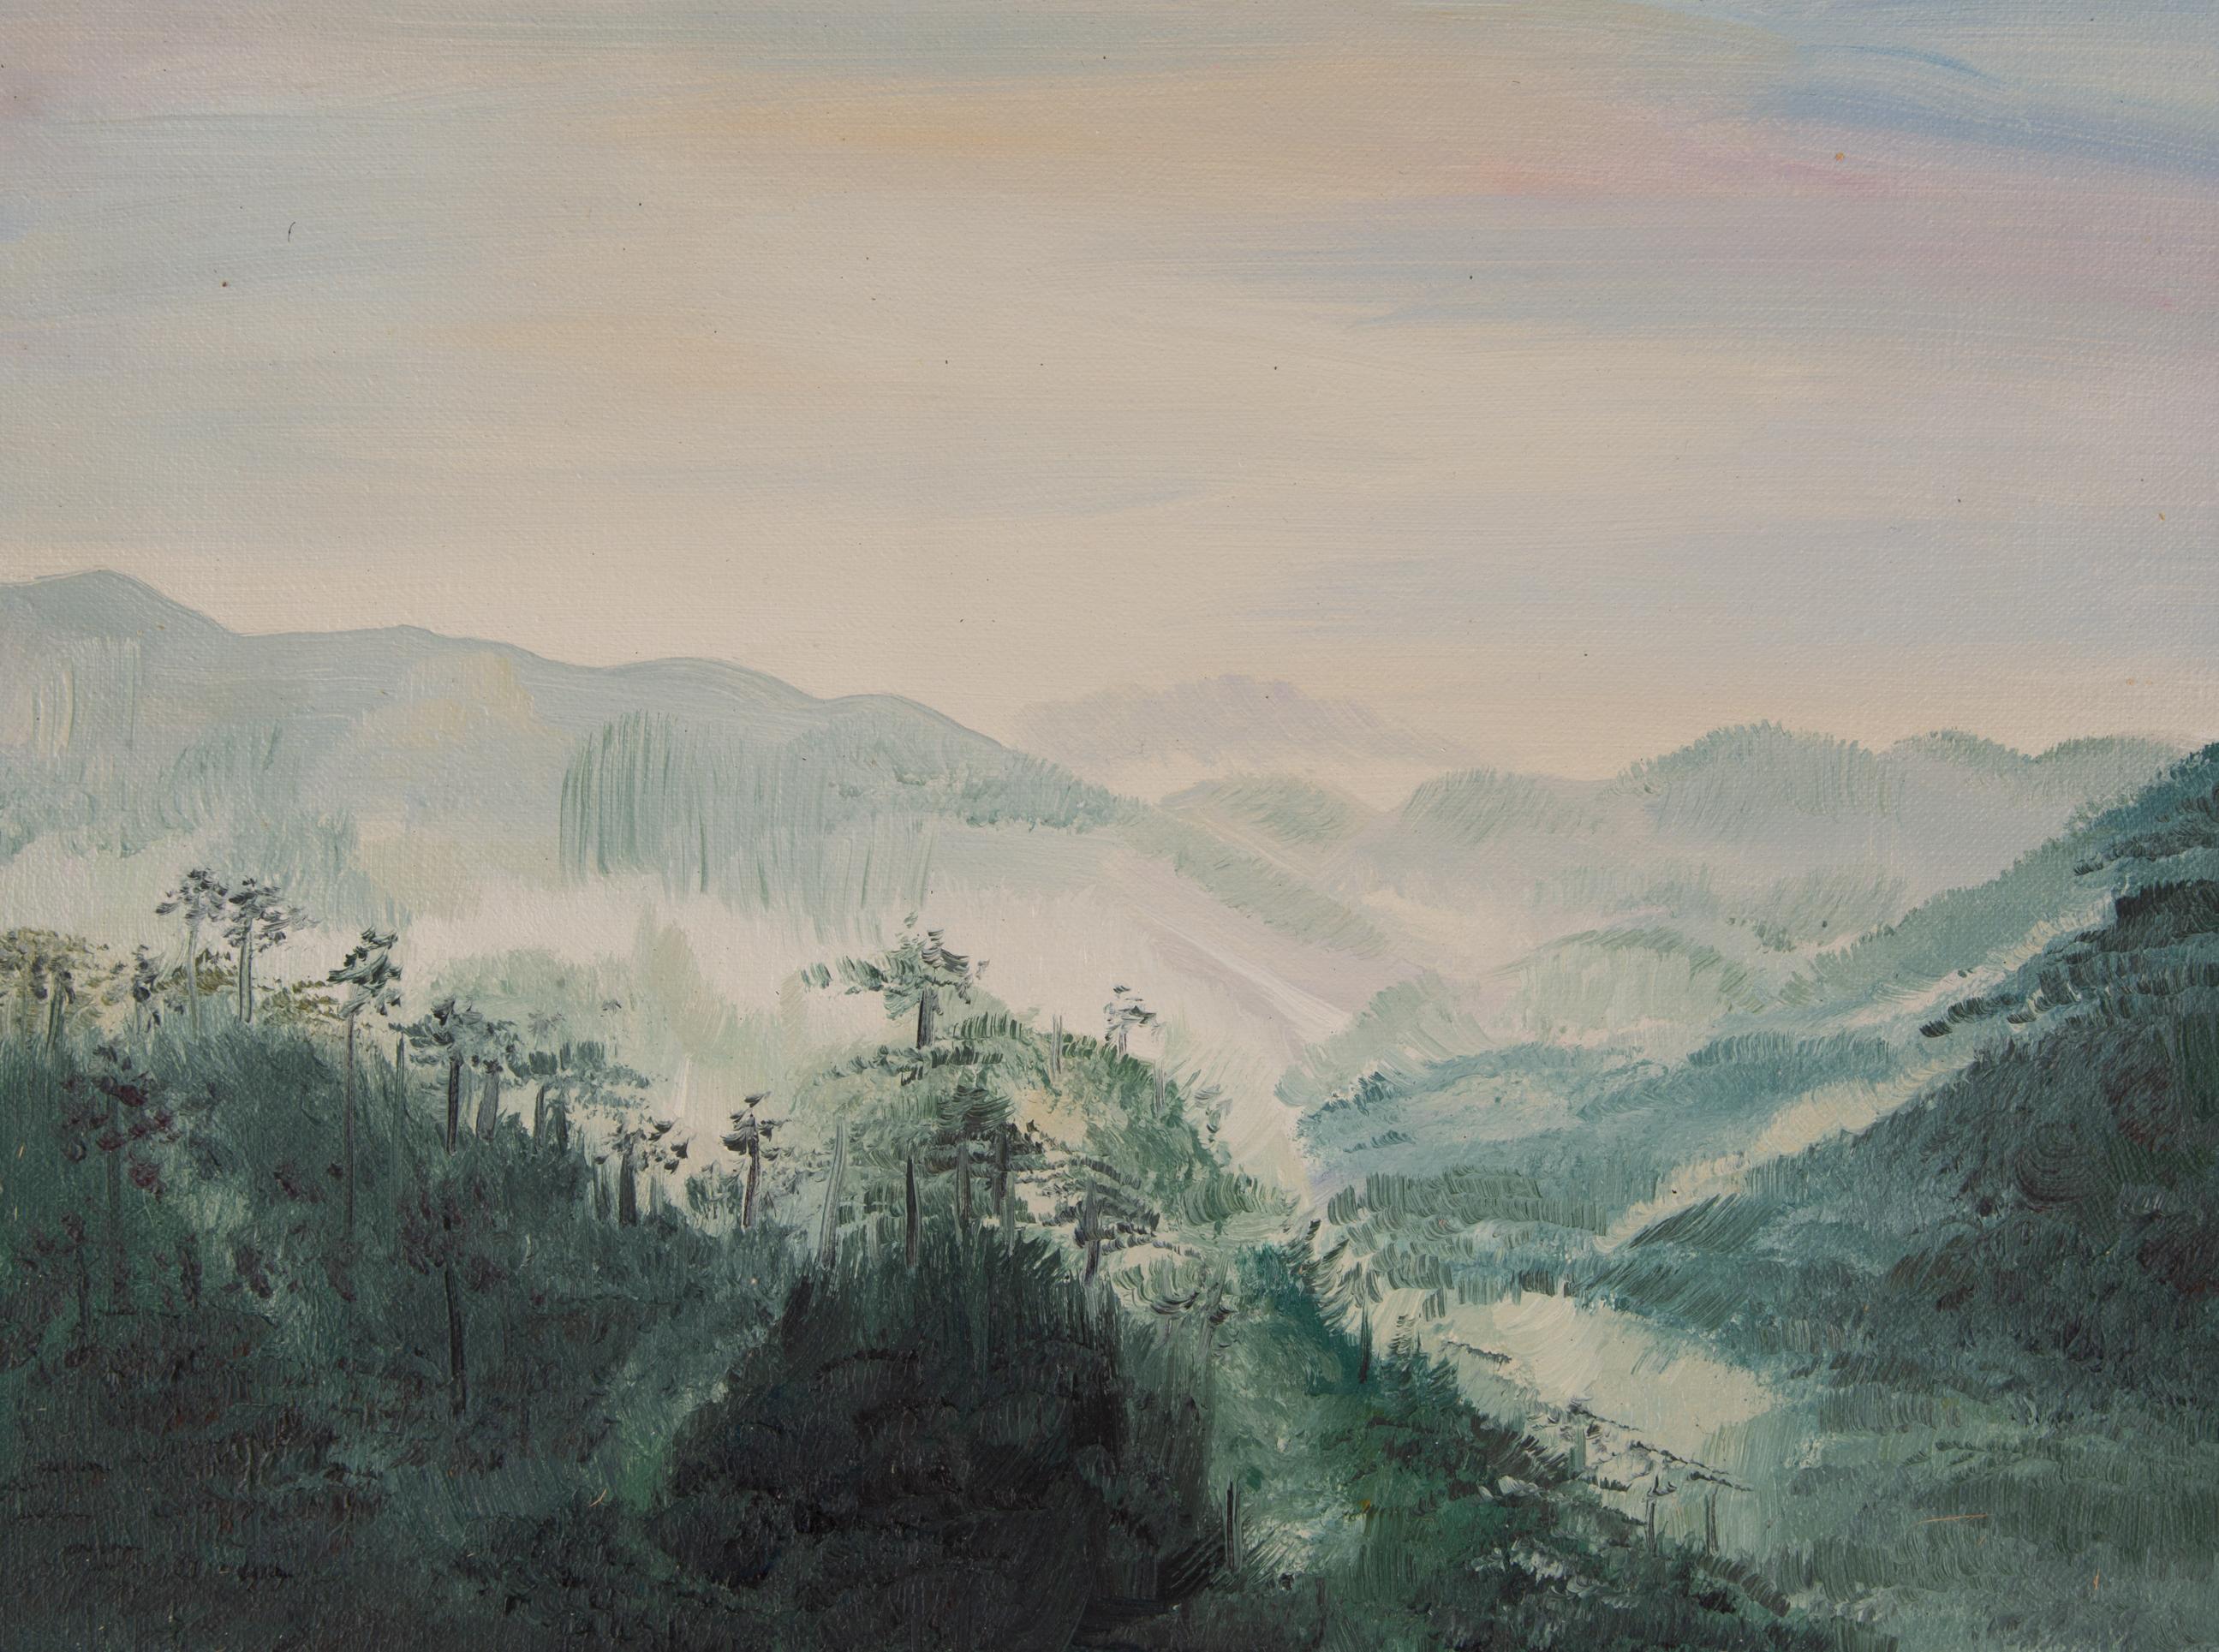 Title: Shan Yin Dao Shang I
Medium: Oil on canvas
Size: 12 x 16 inches
Frame: Framing options available!
Condition: The painting appears to be in excellent condition.
Note: This painting is unstretched
Year: 2000 Circa
Artist: Tao Yu
Signature: